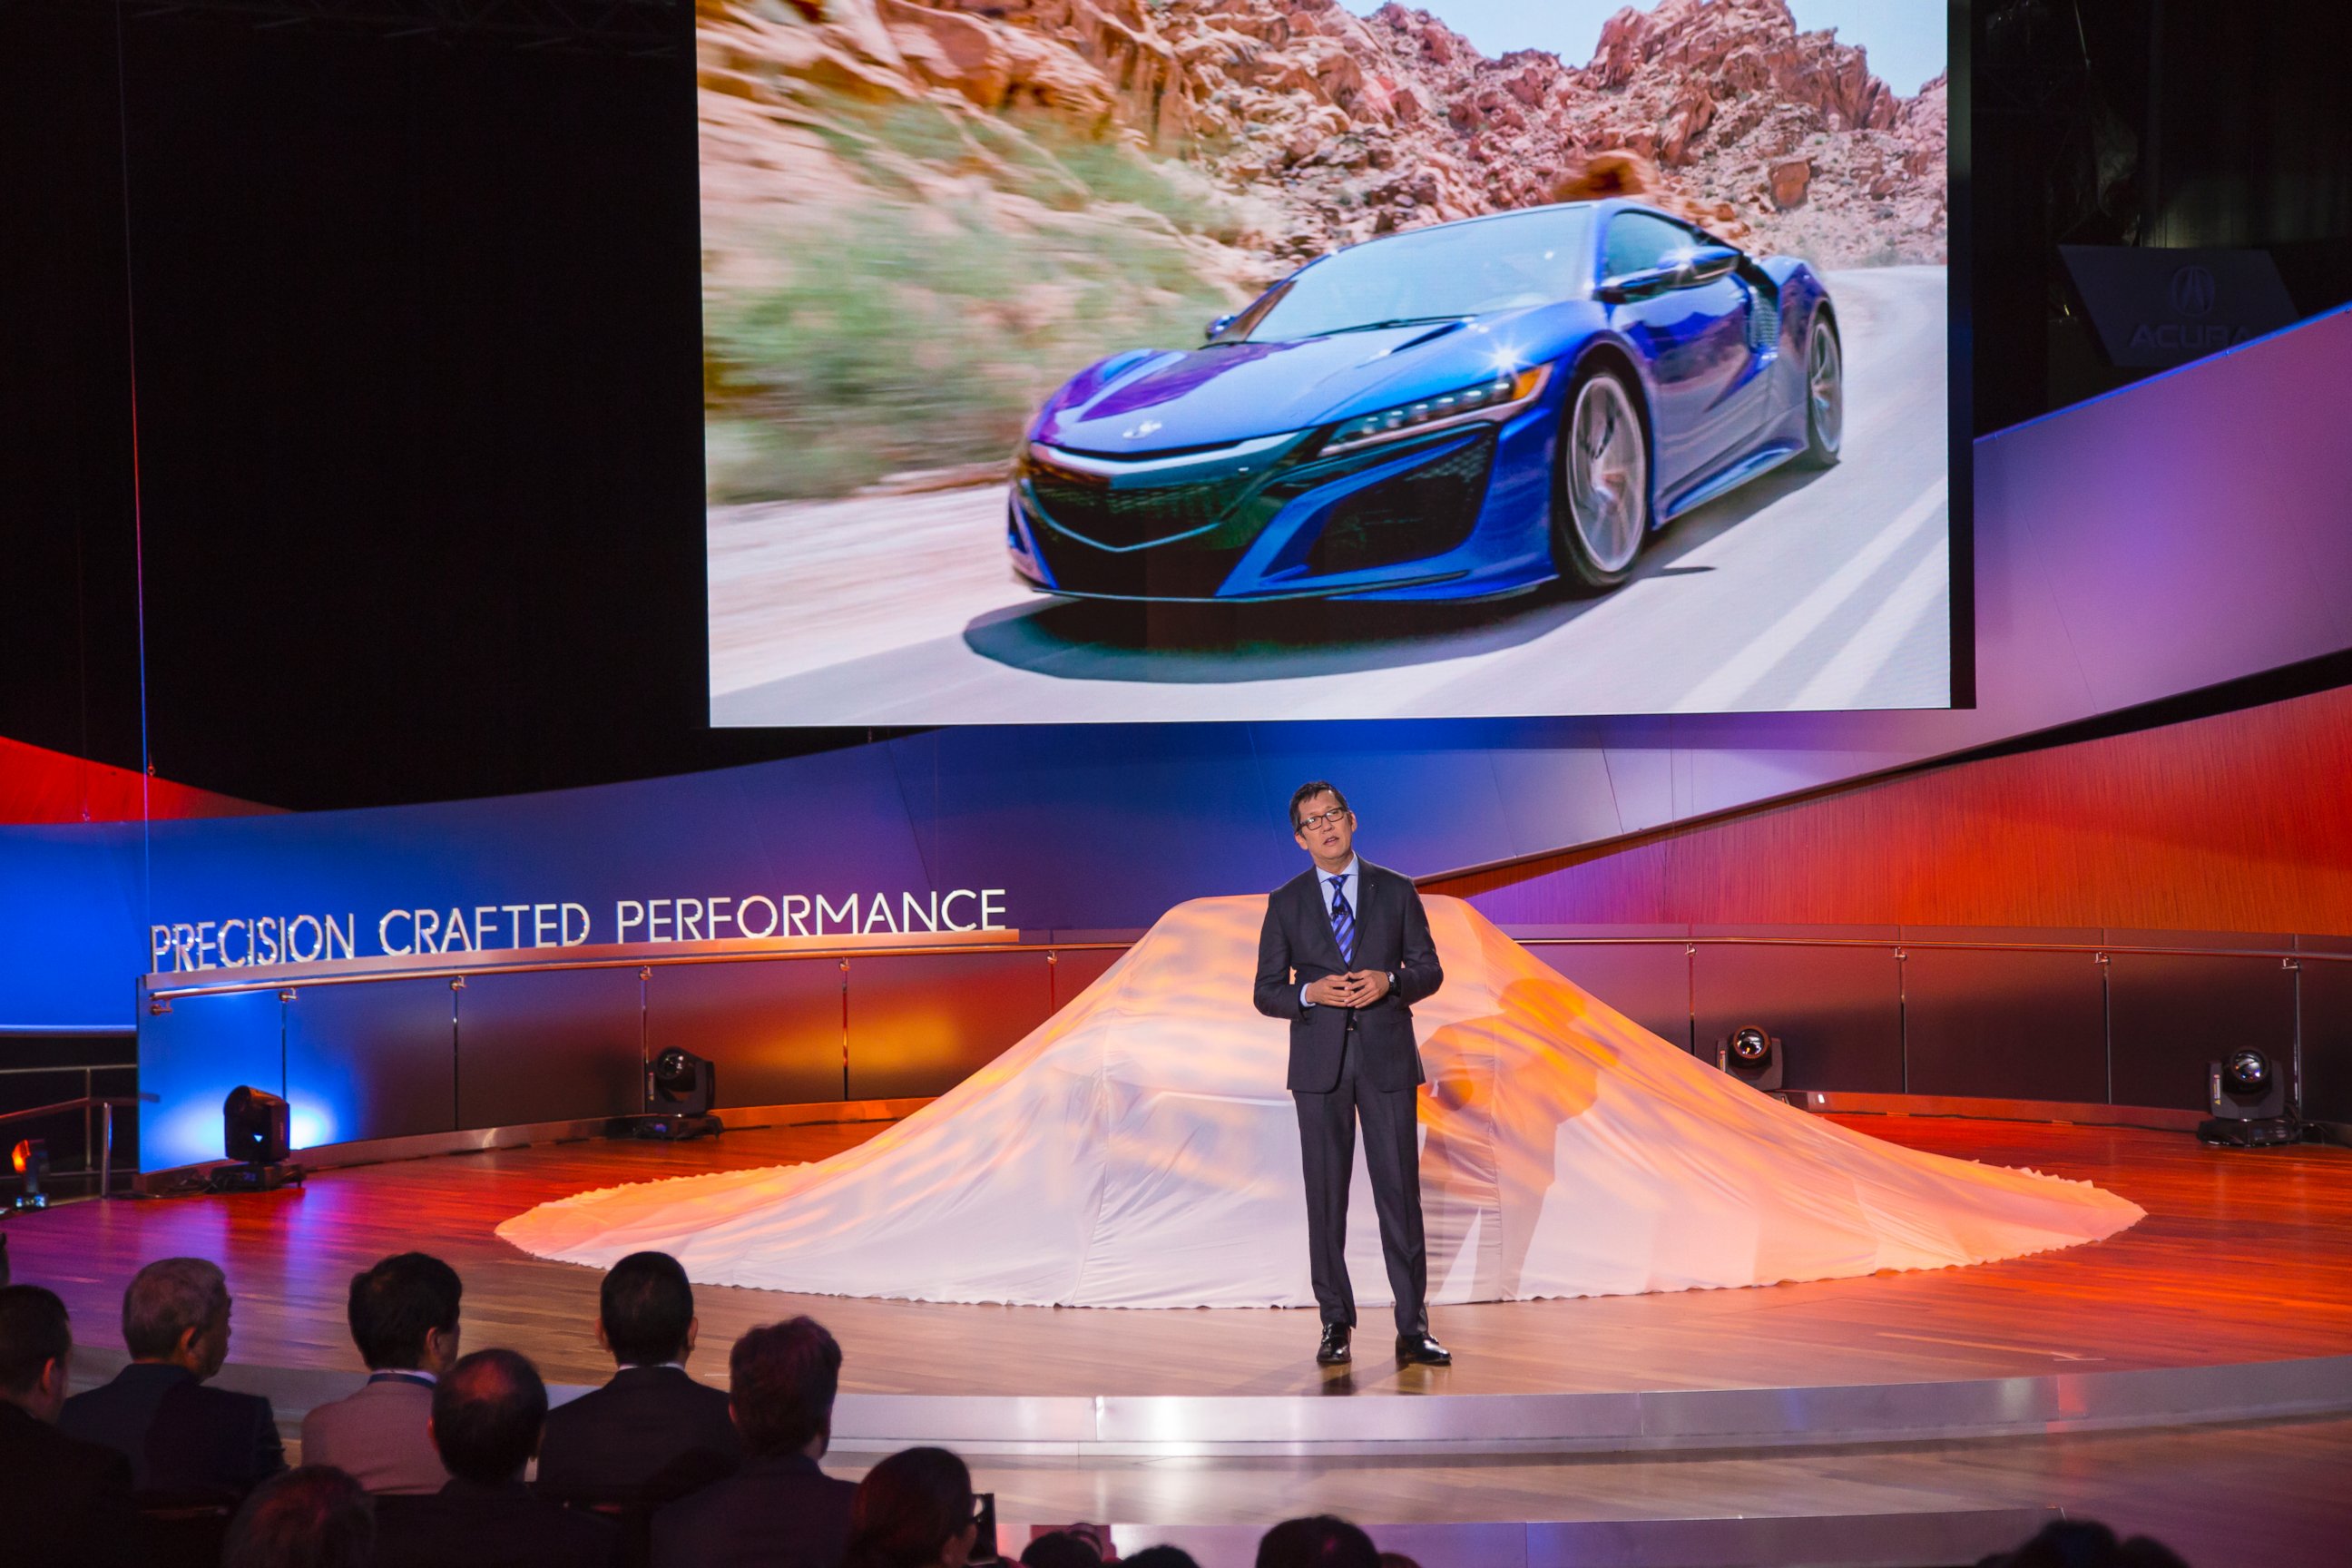 PHOTO: Jon Ikeda at the 2016 North American International Auto Show unveiling of the Acura Precision Concept in Detroit, Jan. 12, 2016.